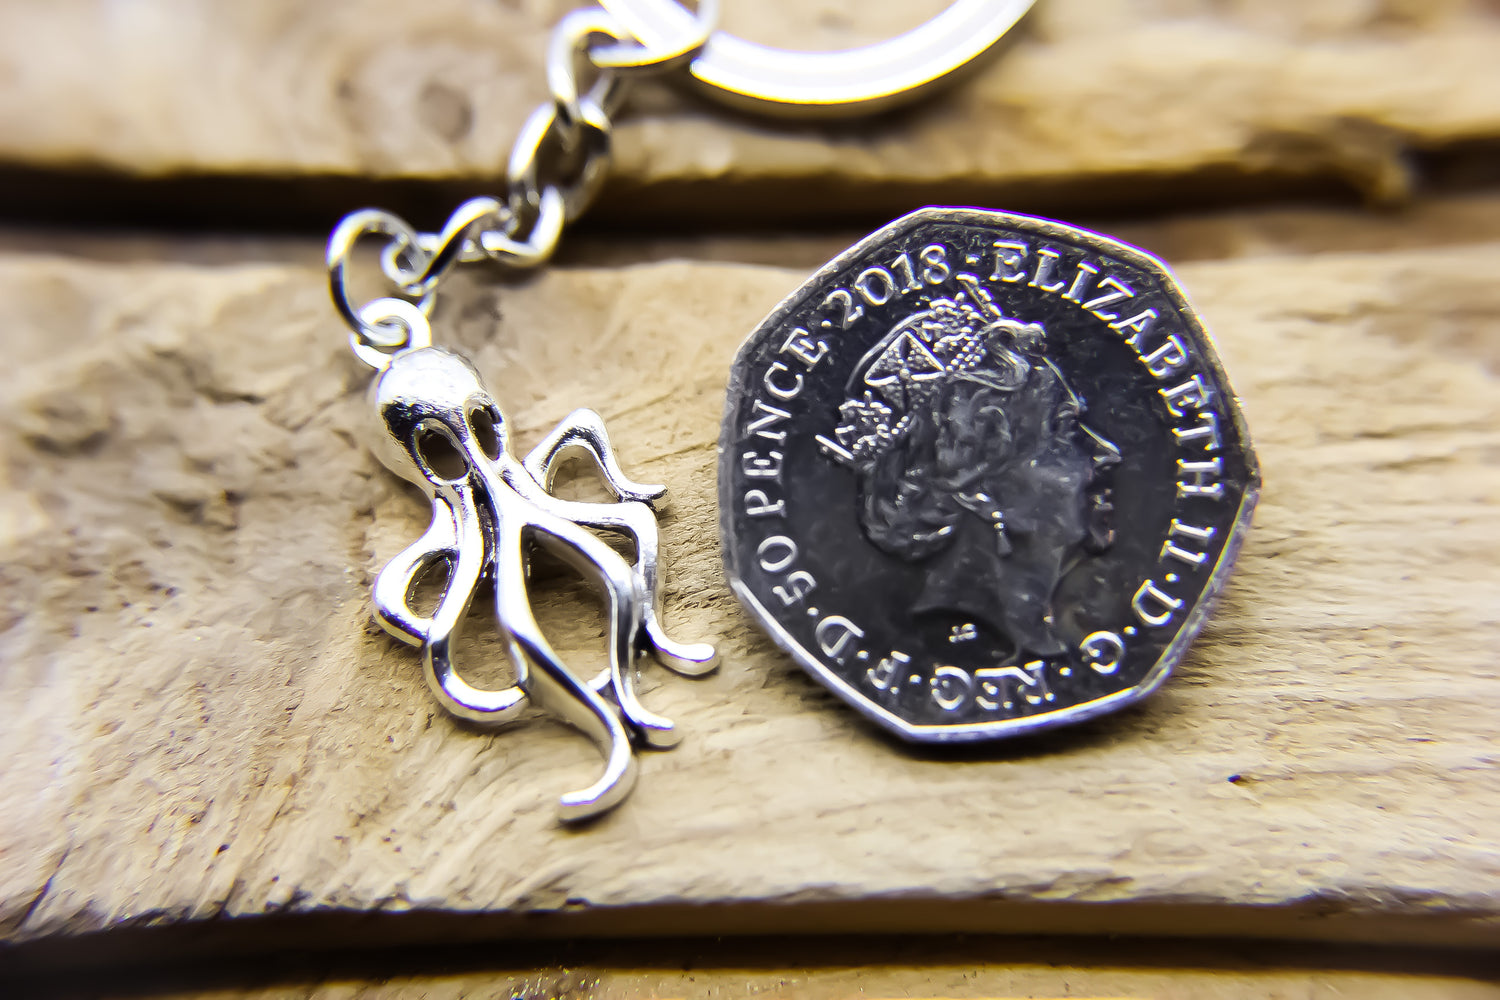 Silver octopus pendant next to a fifty pence coin